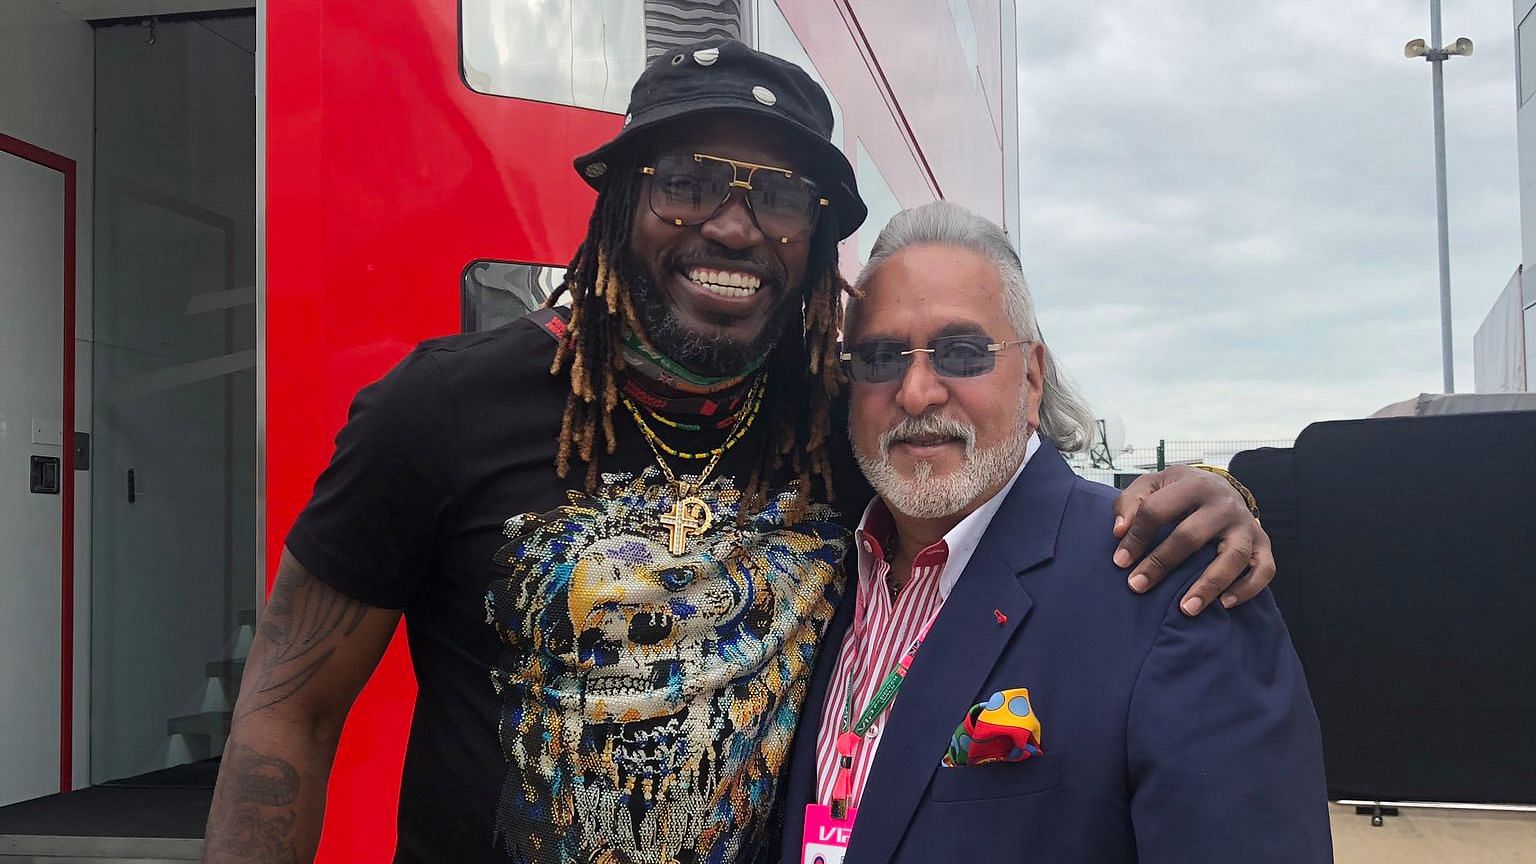 Vijay Mallya has been subjected to heavy trolling by users on the internet after West Indies batsman Chris Gayle posted a picture with him on Twitter.